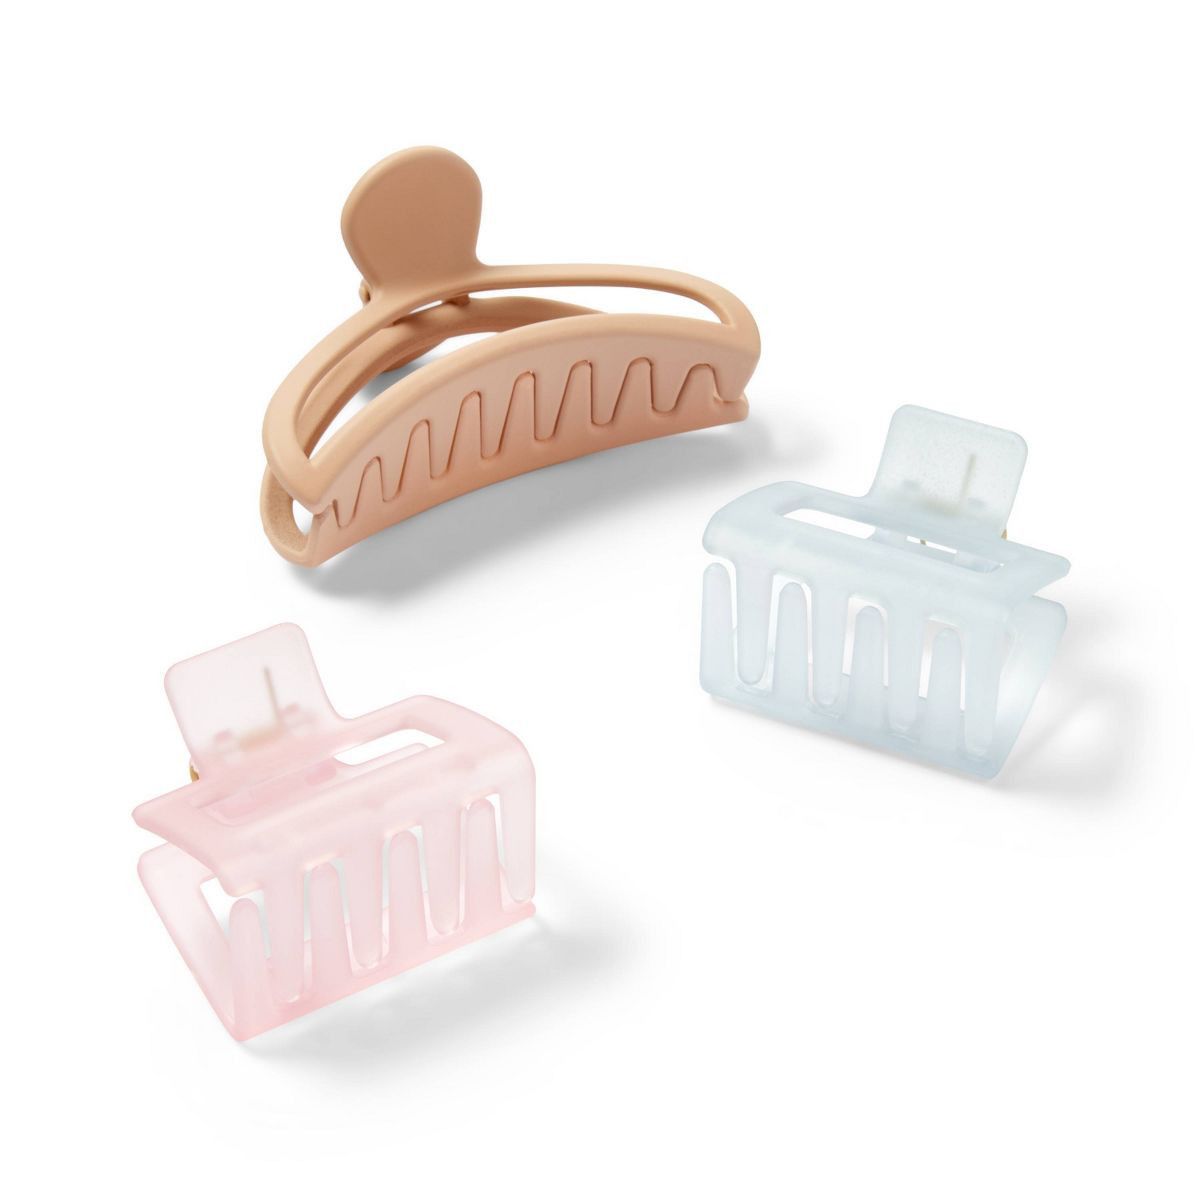 Hair Claw Clip Gift Set - Colorway - 8pc | Target